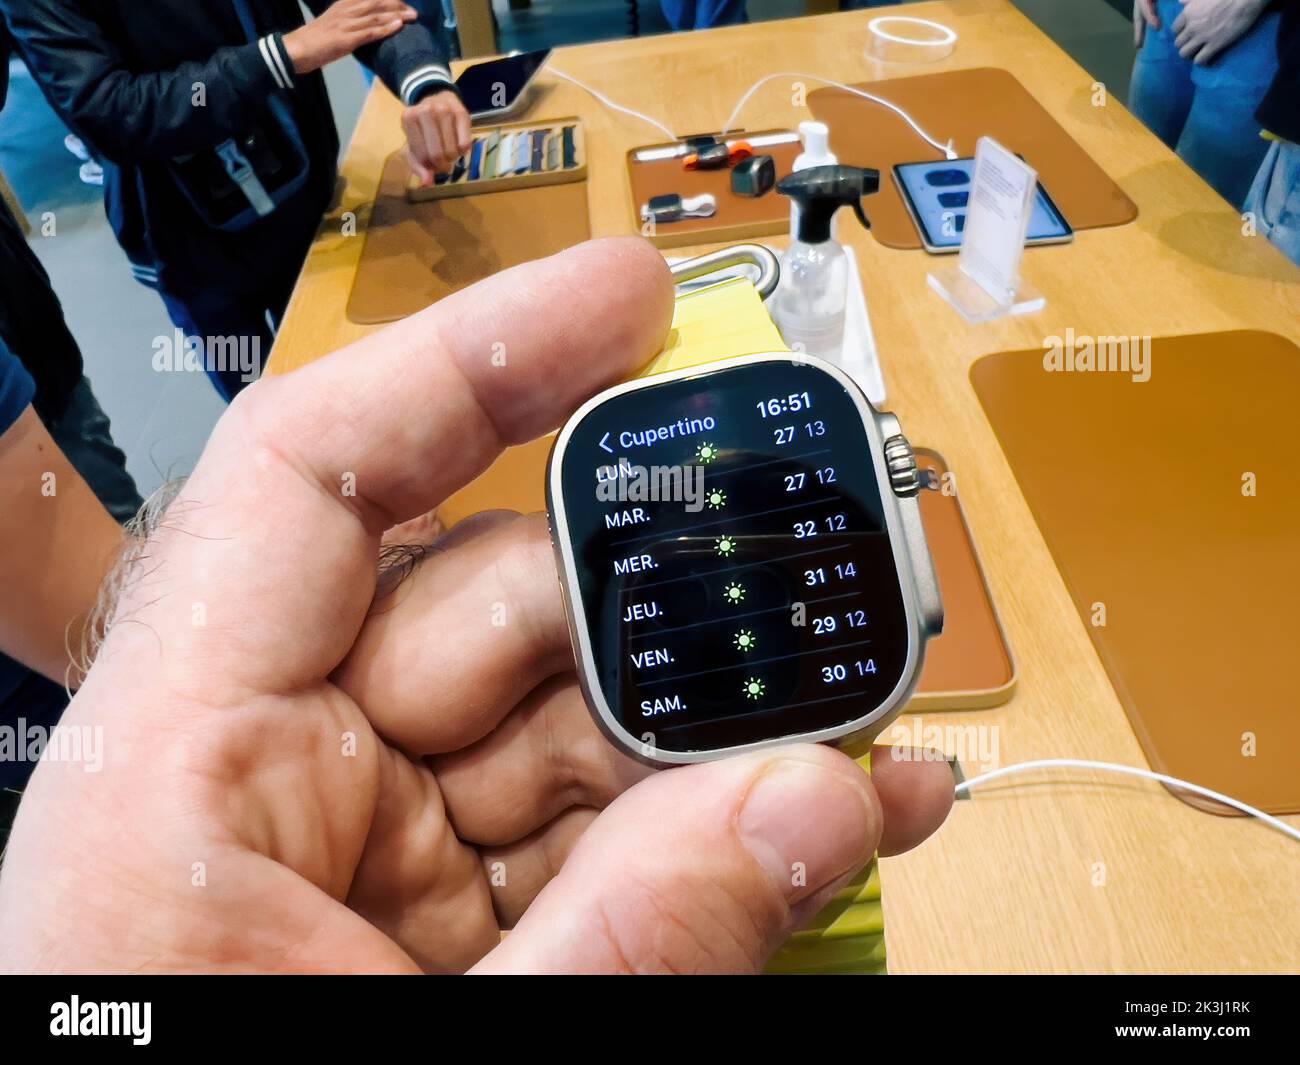 Paris, France - Sep 23, 2022: Weather in Cupertino on the display app Apple Store first day of sale for new titanium Apple Watch Ultra designed for extreme activities like endurance sports, elite athletes, trailblazing, adventure Stock Photo